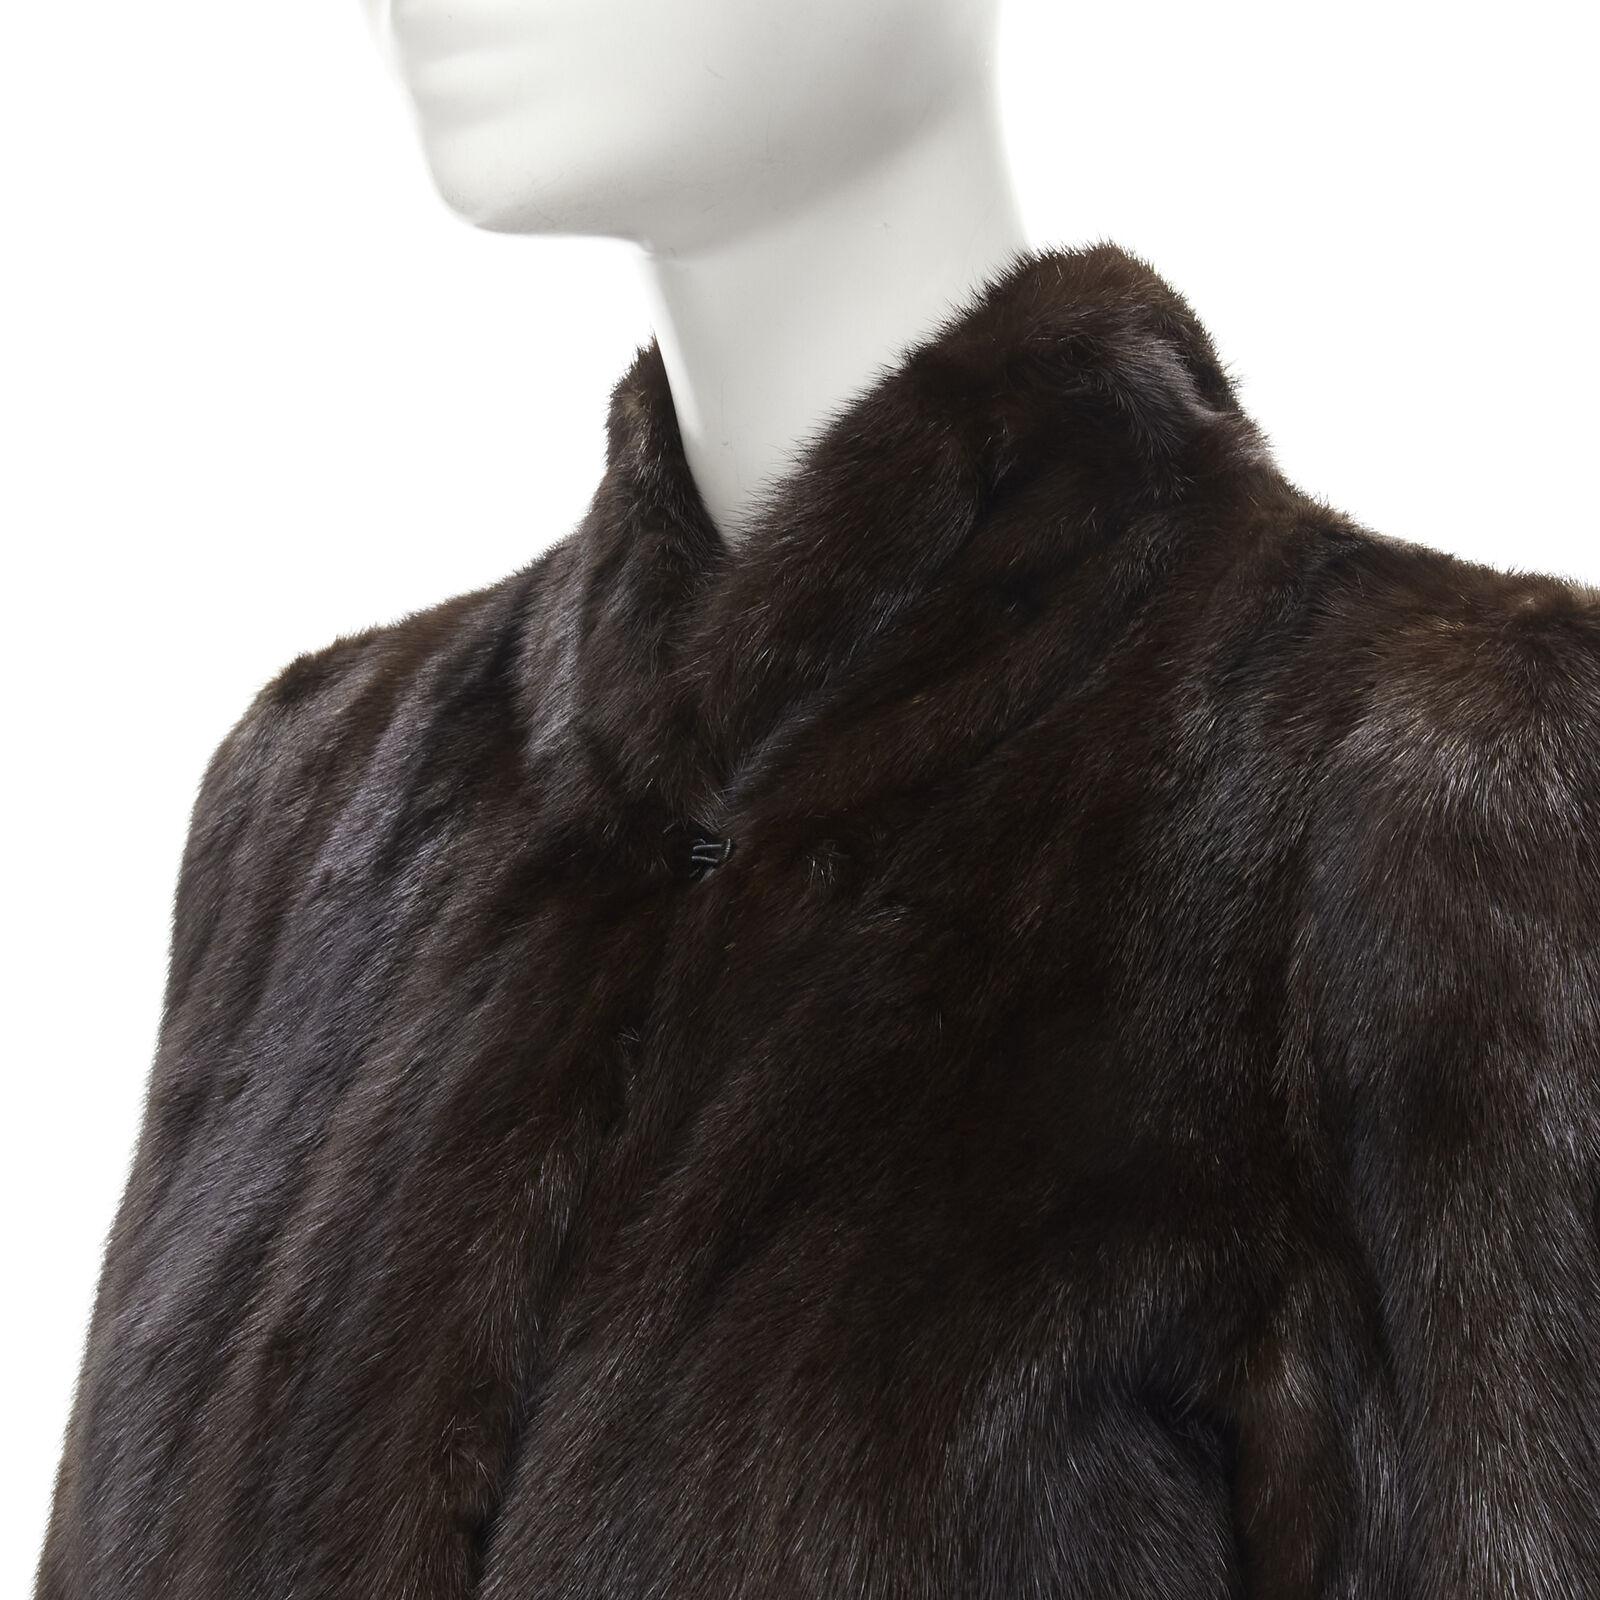 FONG'S brown fur mandarin collar long sleeve hook eye coat jacket
Reference: JECW/A00002
Brand: Fong's
Material: Fur
Color: Brown
Pattern: Solid
Closure: Hook & Eye
Lining: Fabric
Extra Details: Drawstring at the waist aloowing jacket to be cinched